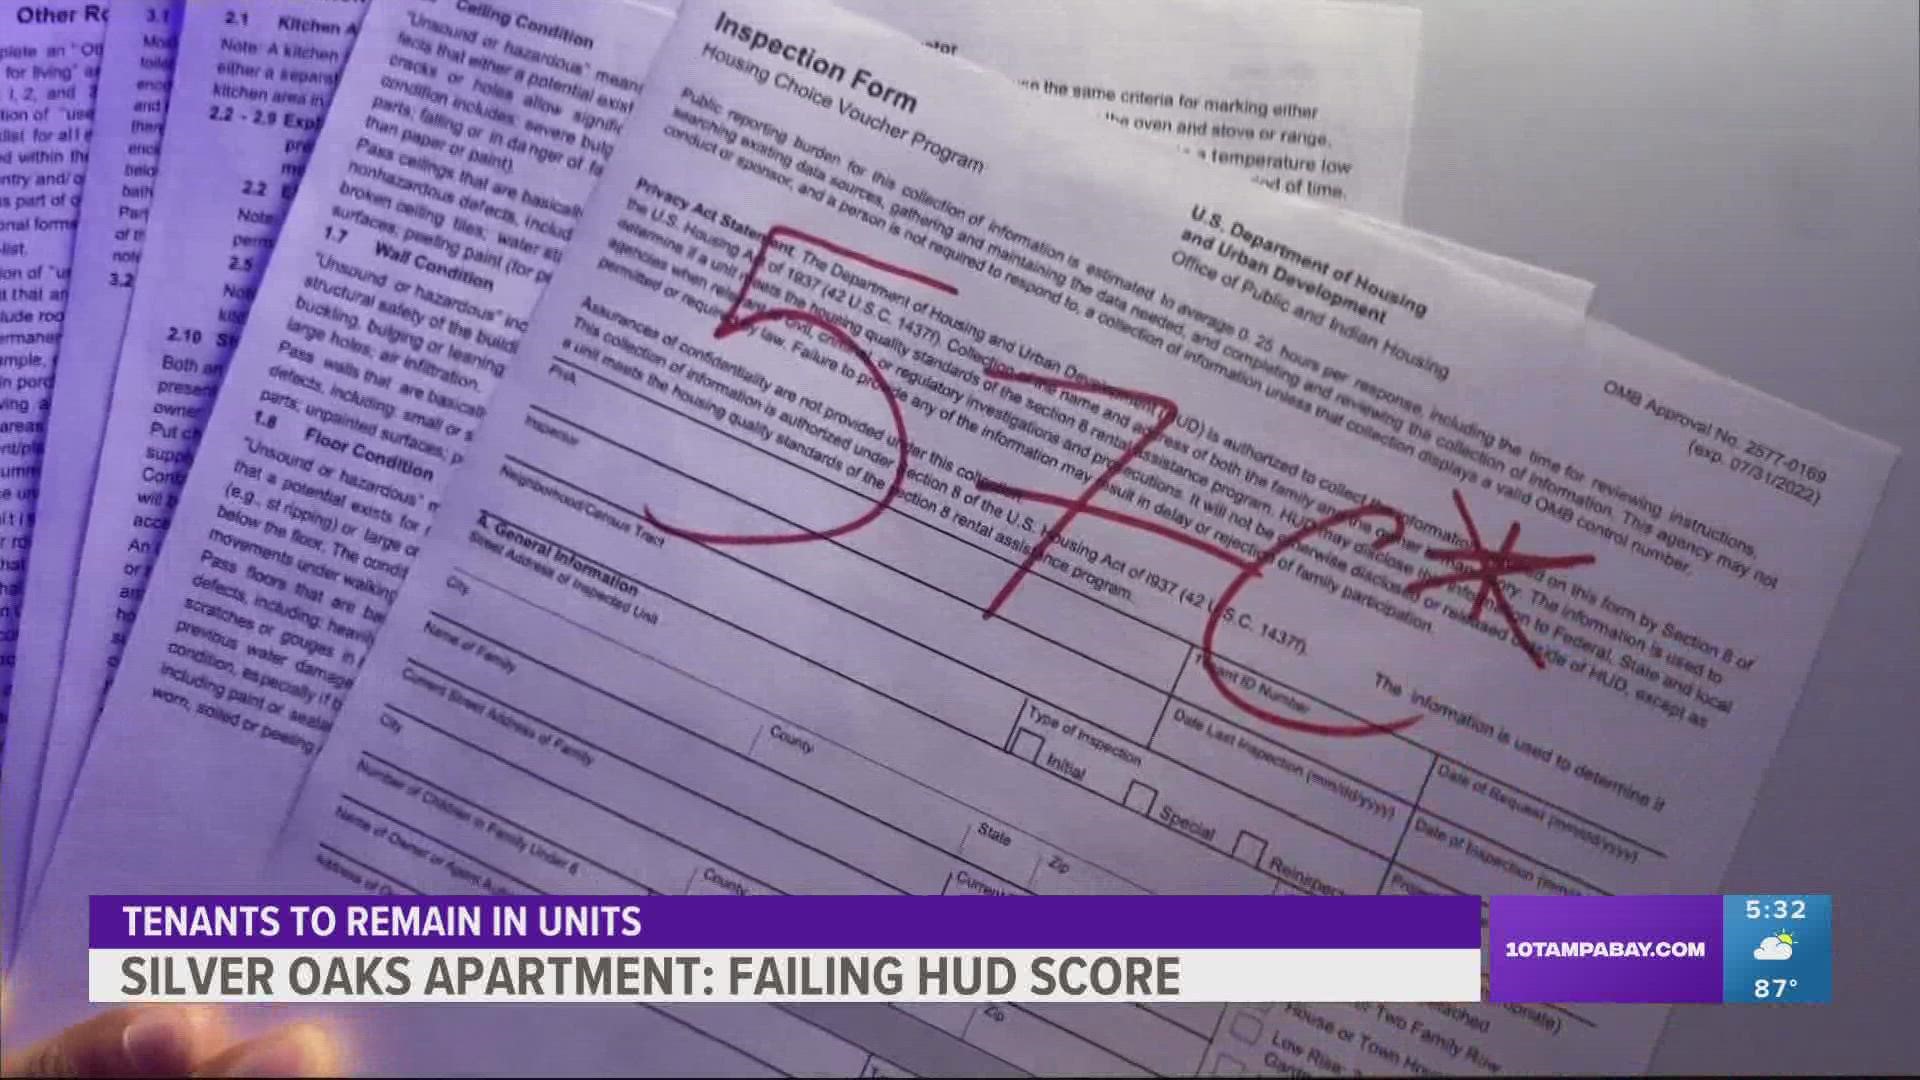 Last month, the affordable housing complex received a failing REAC inspection score.